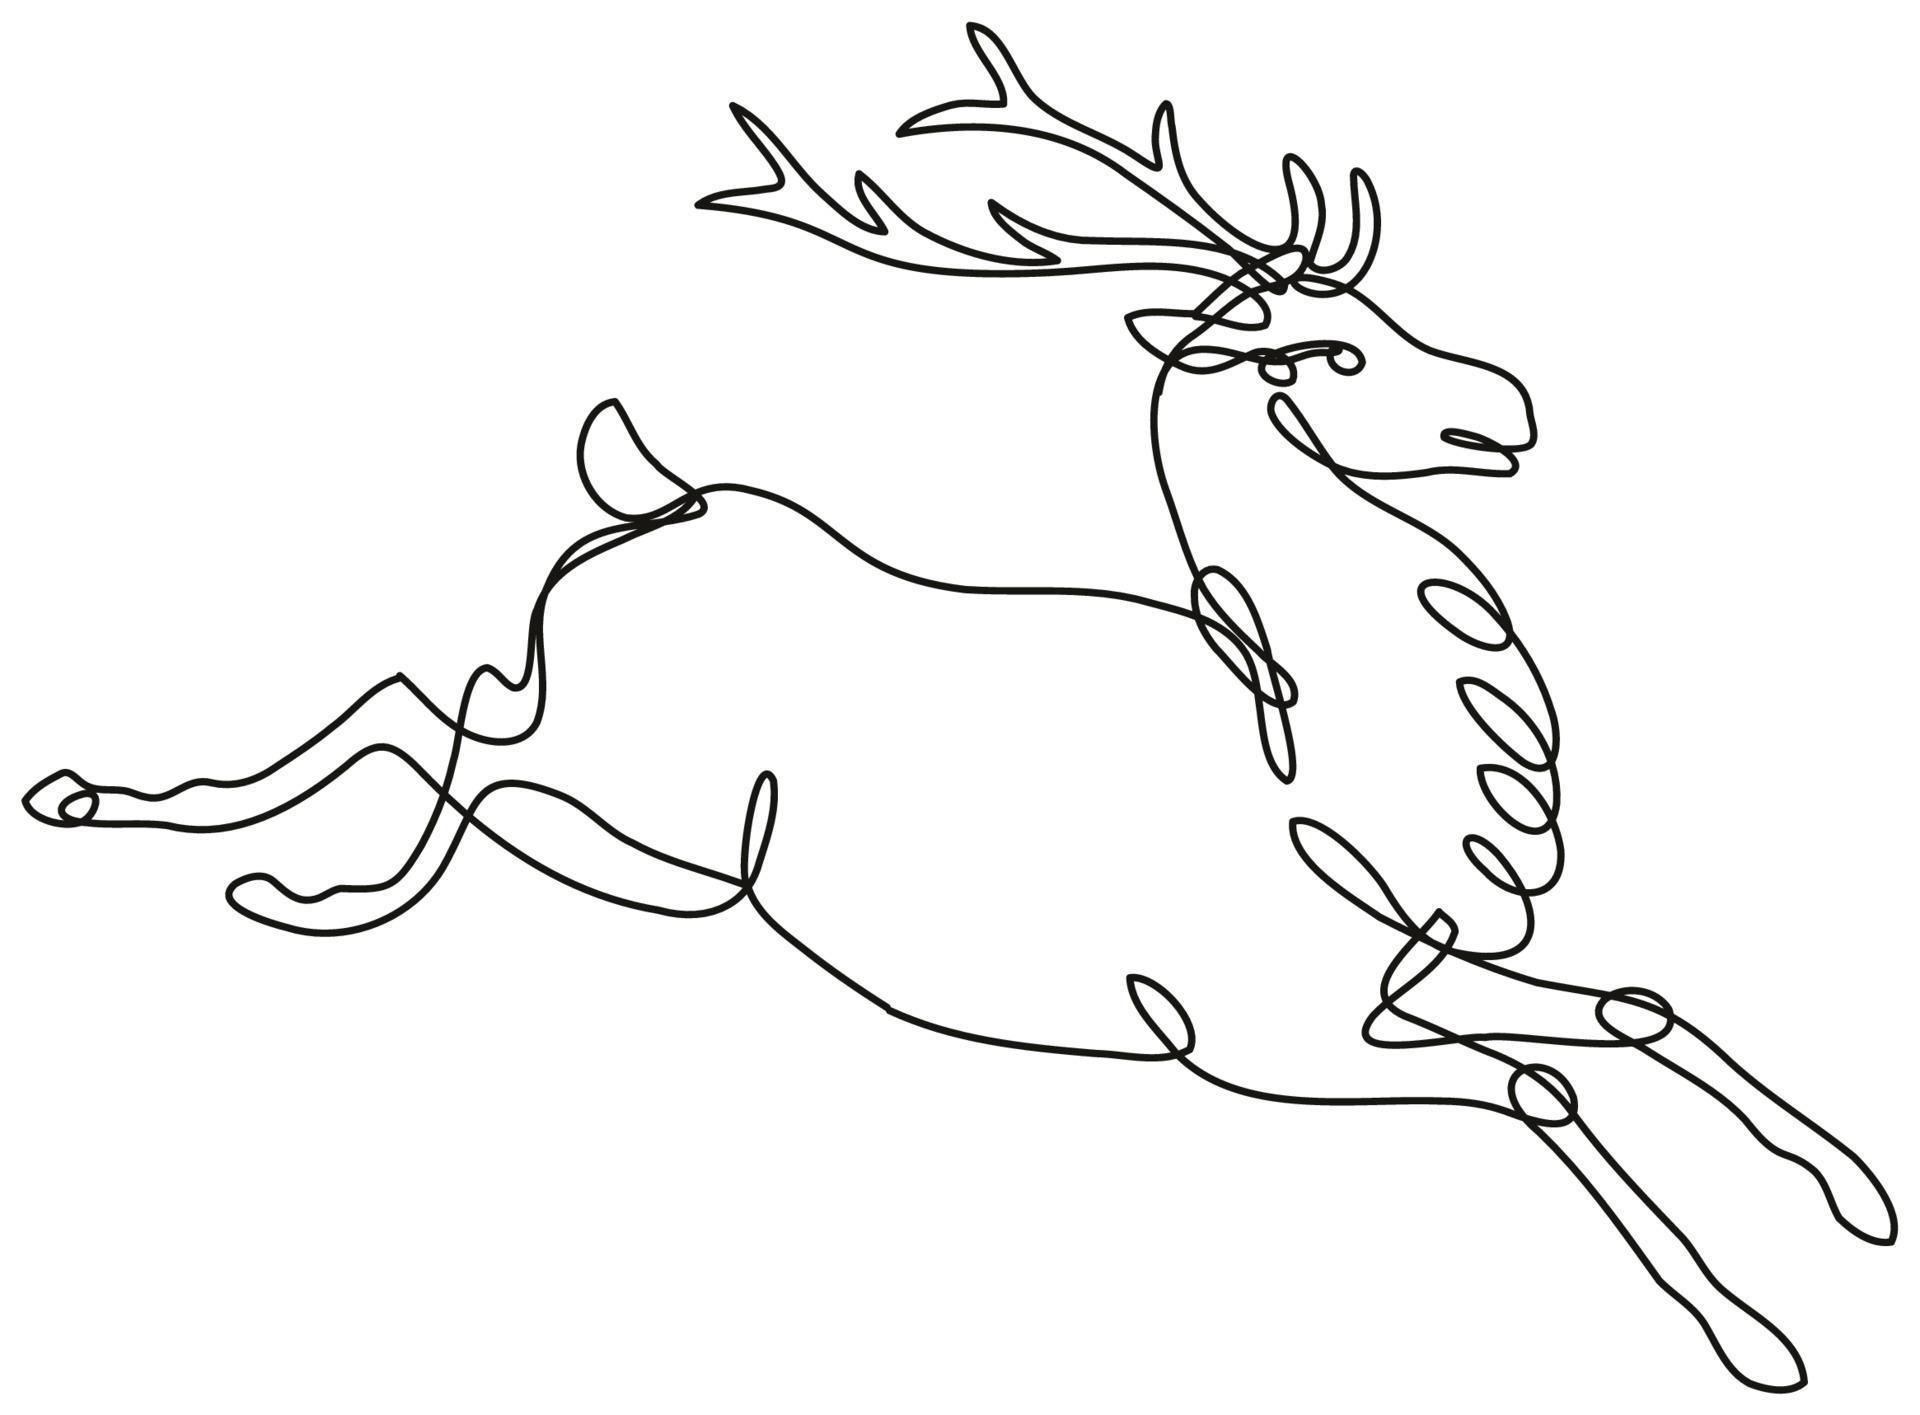 Red Deer Stag or Buck Jumping Side View Continuous Line Drawing 3414464 ...